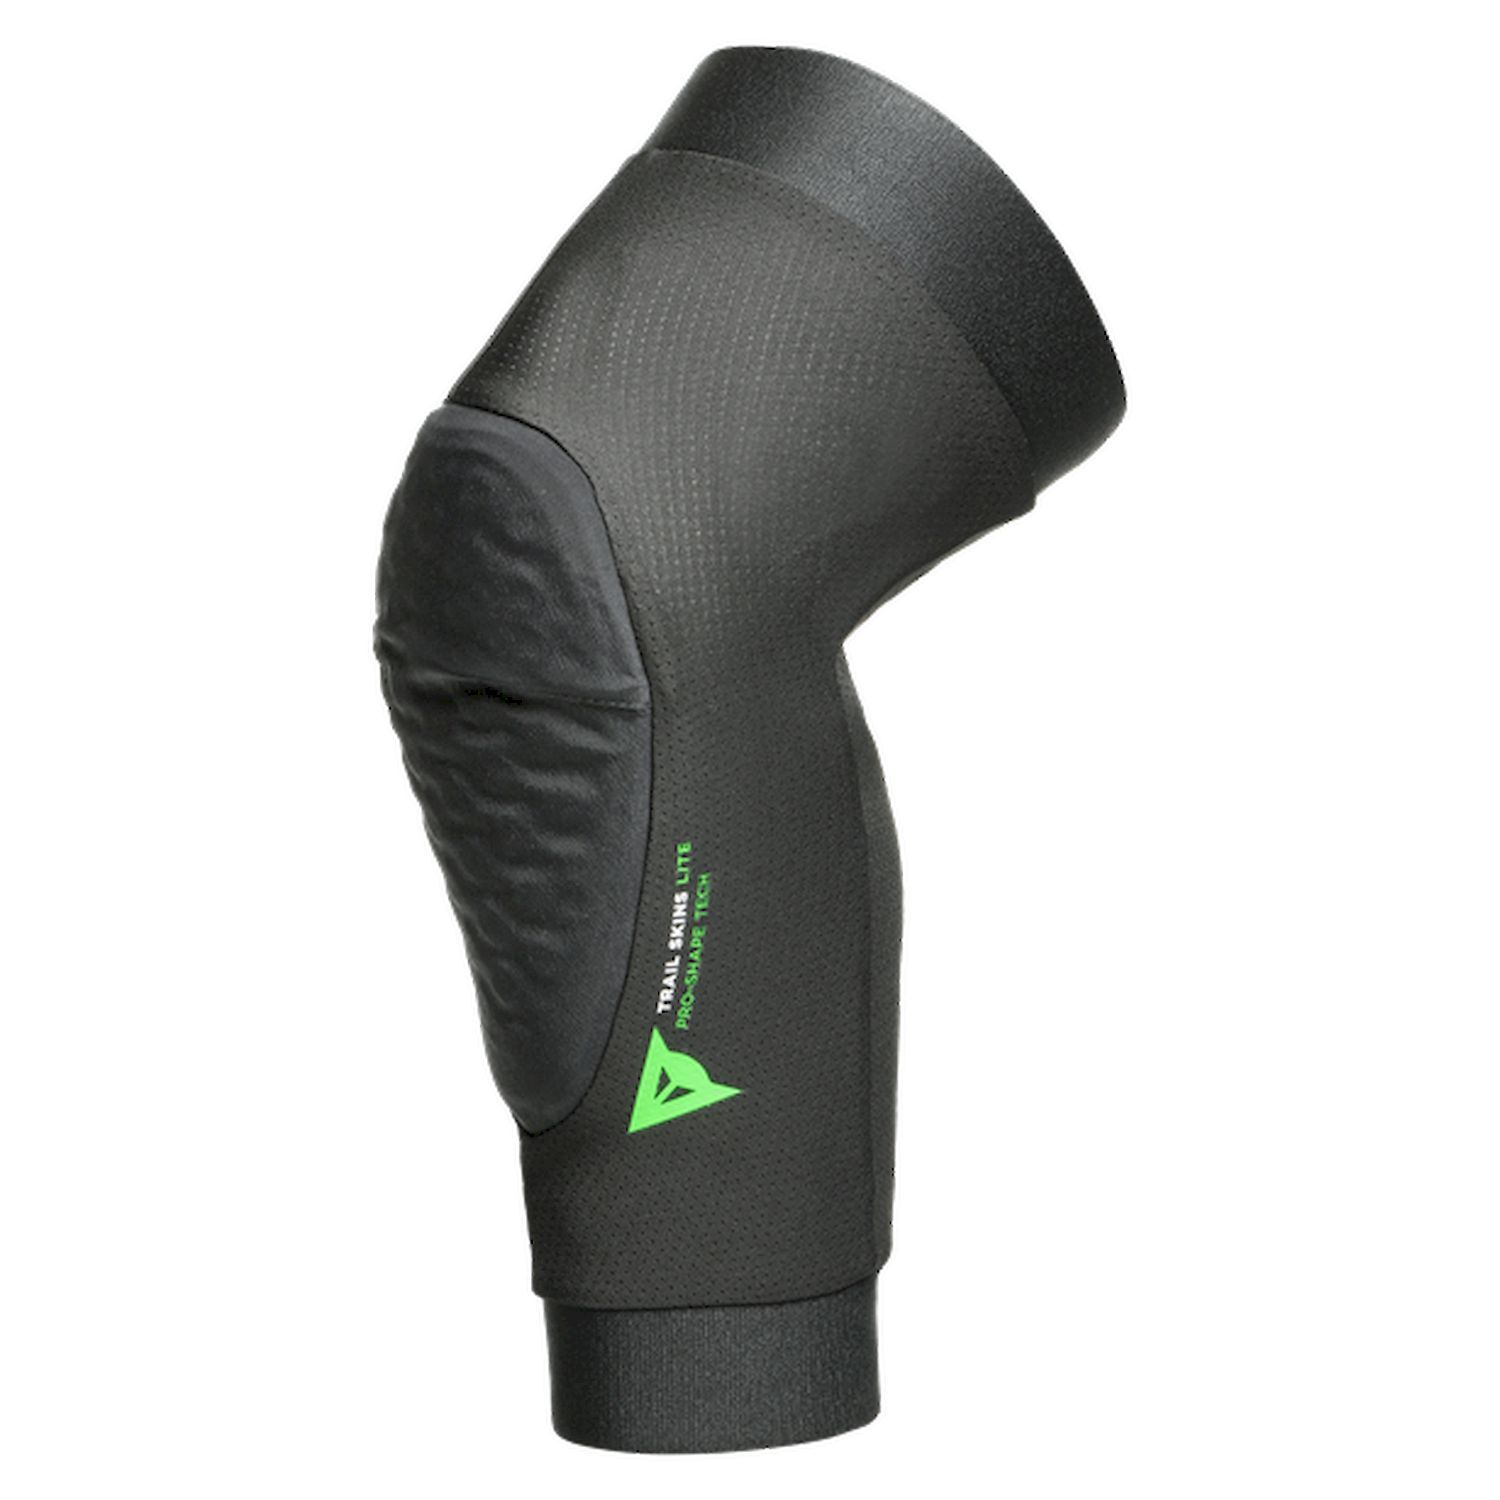 Dainese Trail Skins Lite Knee Guards - Rodilleras MTB - Hombre